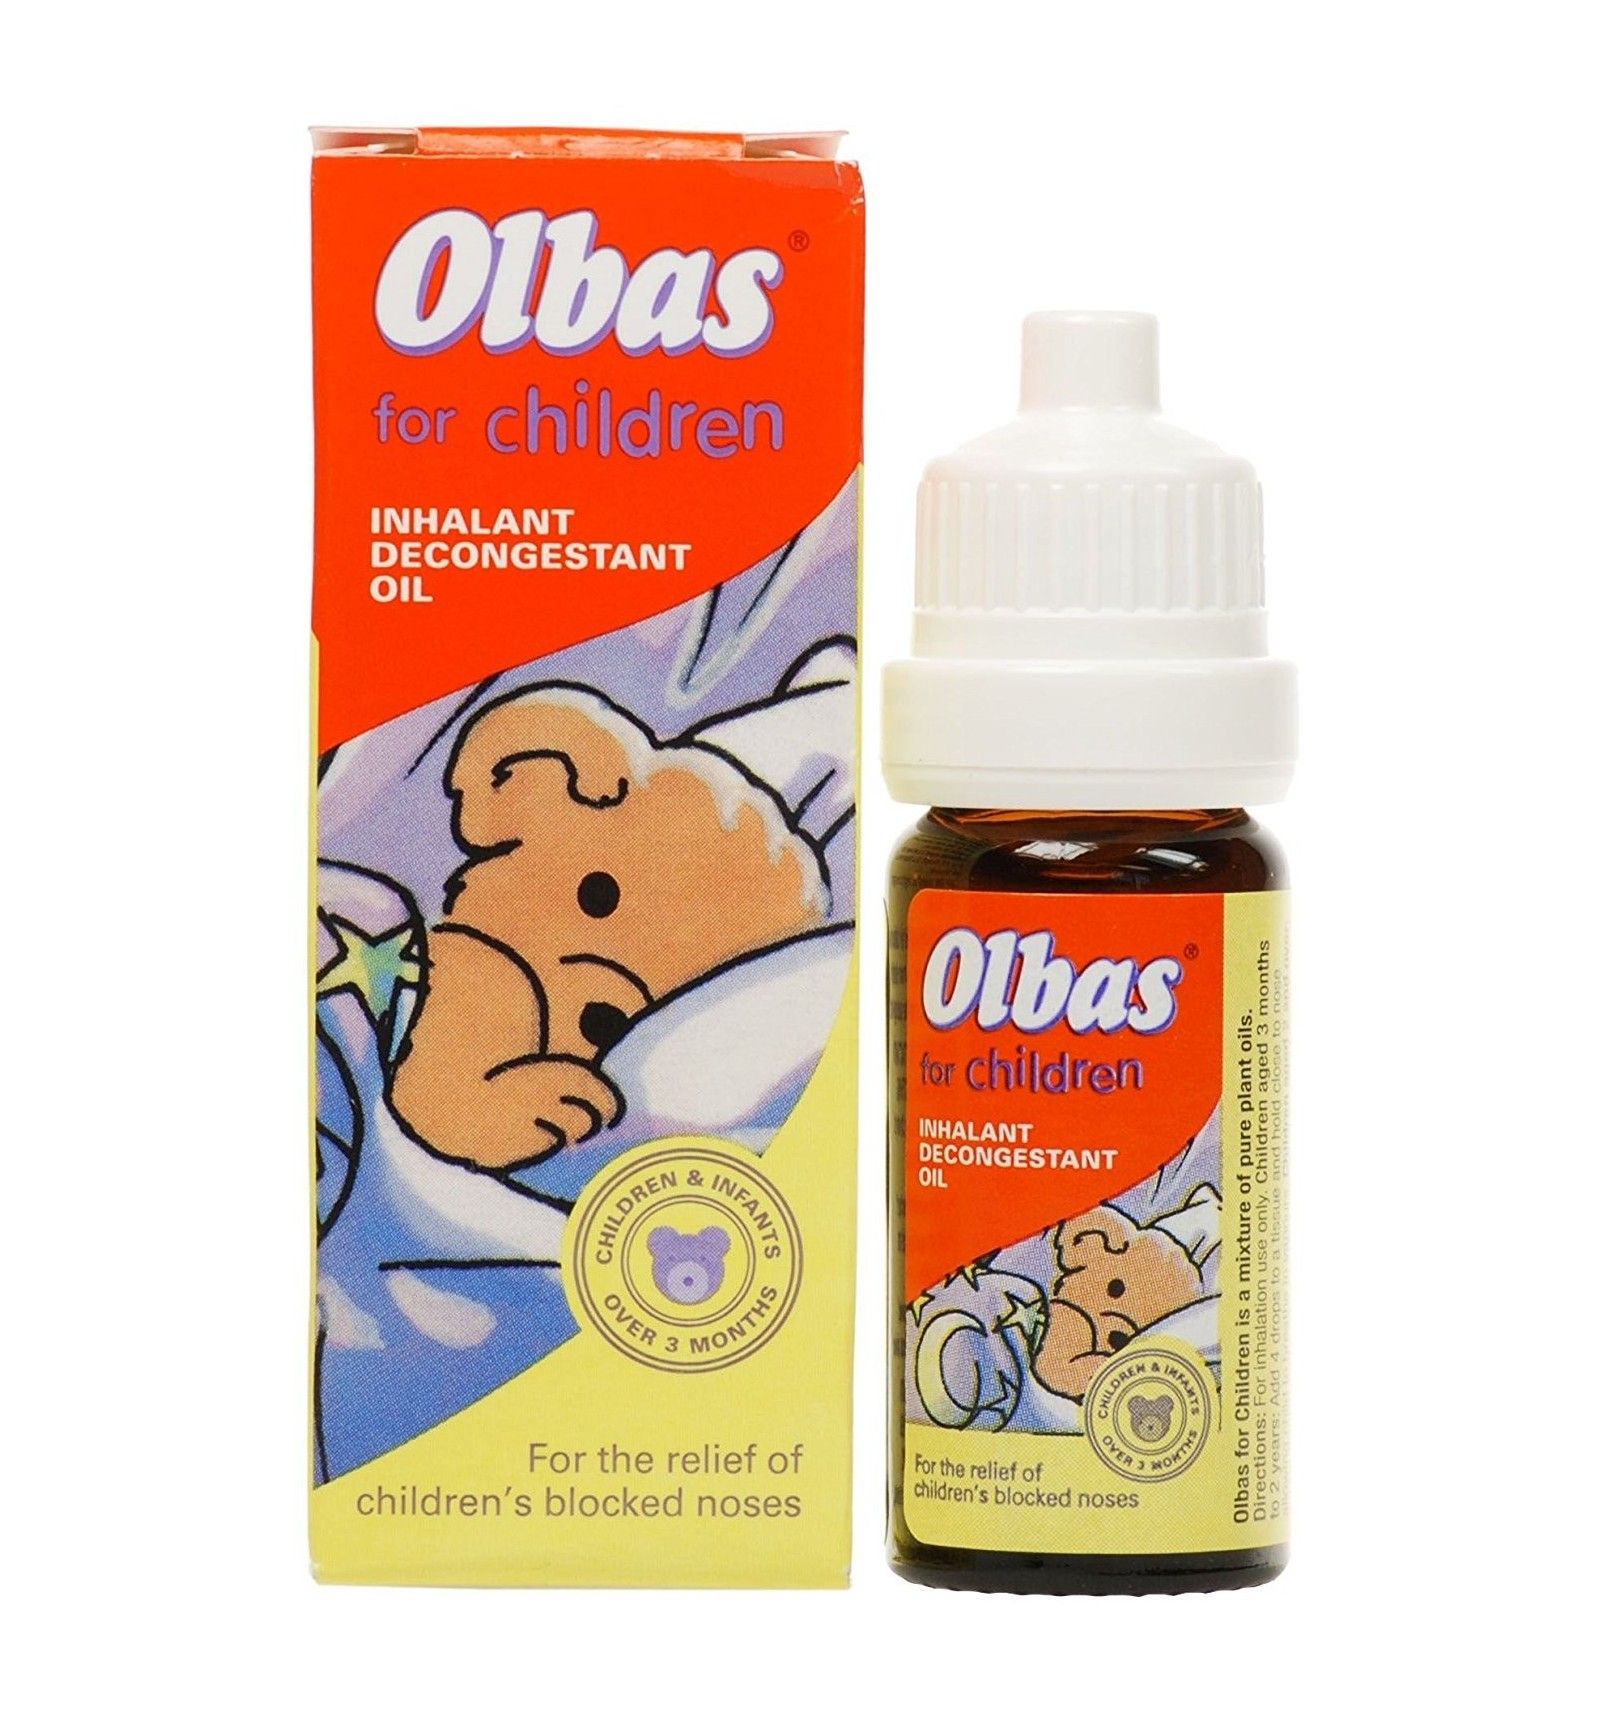 Is Olbas Oil Safe For Asthma